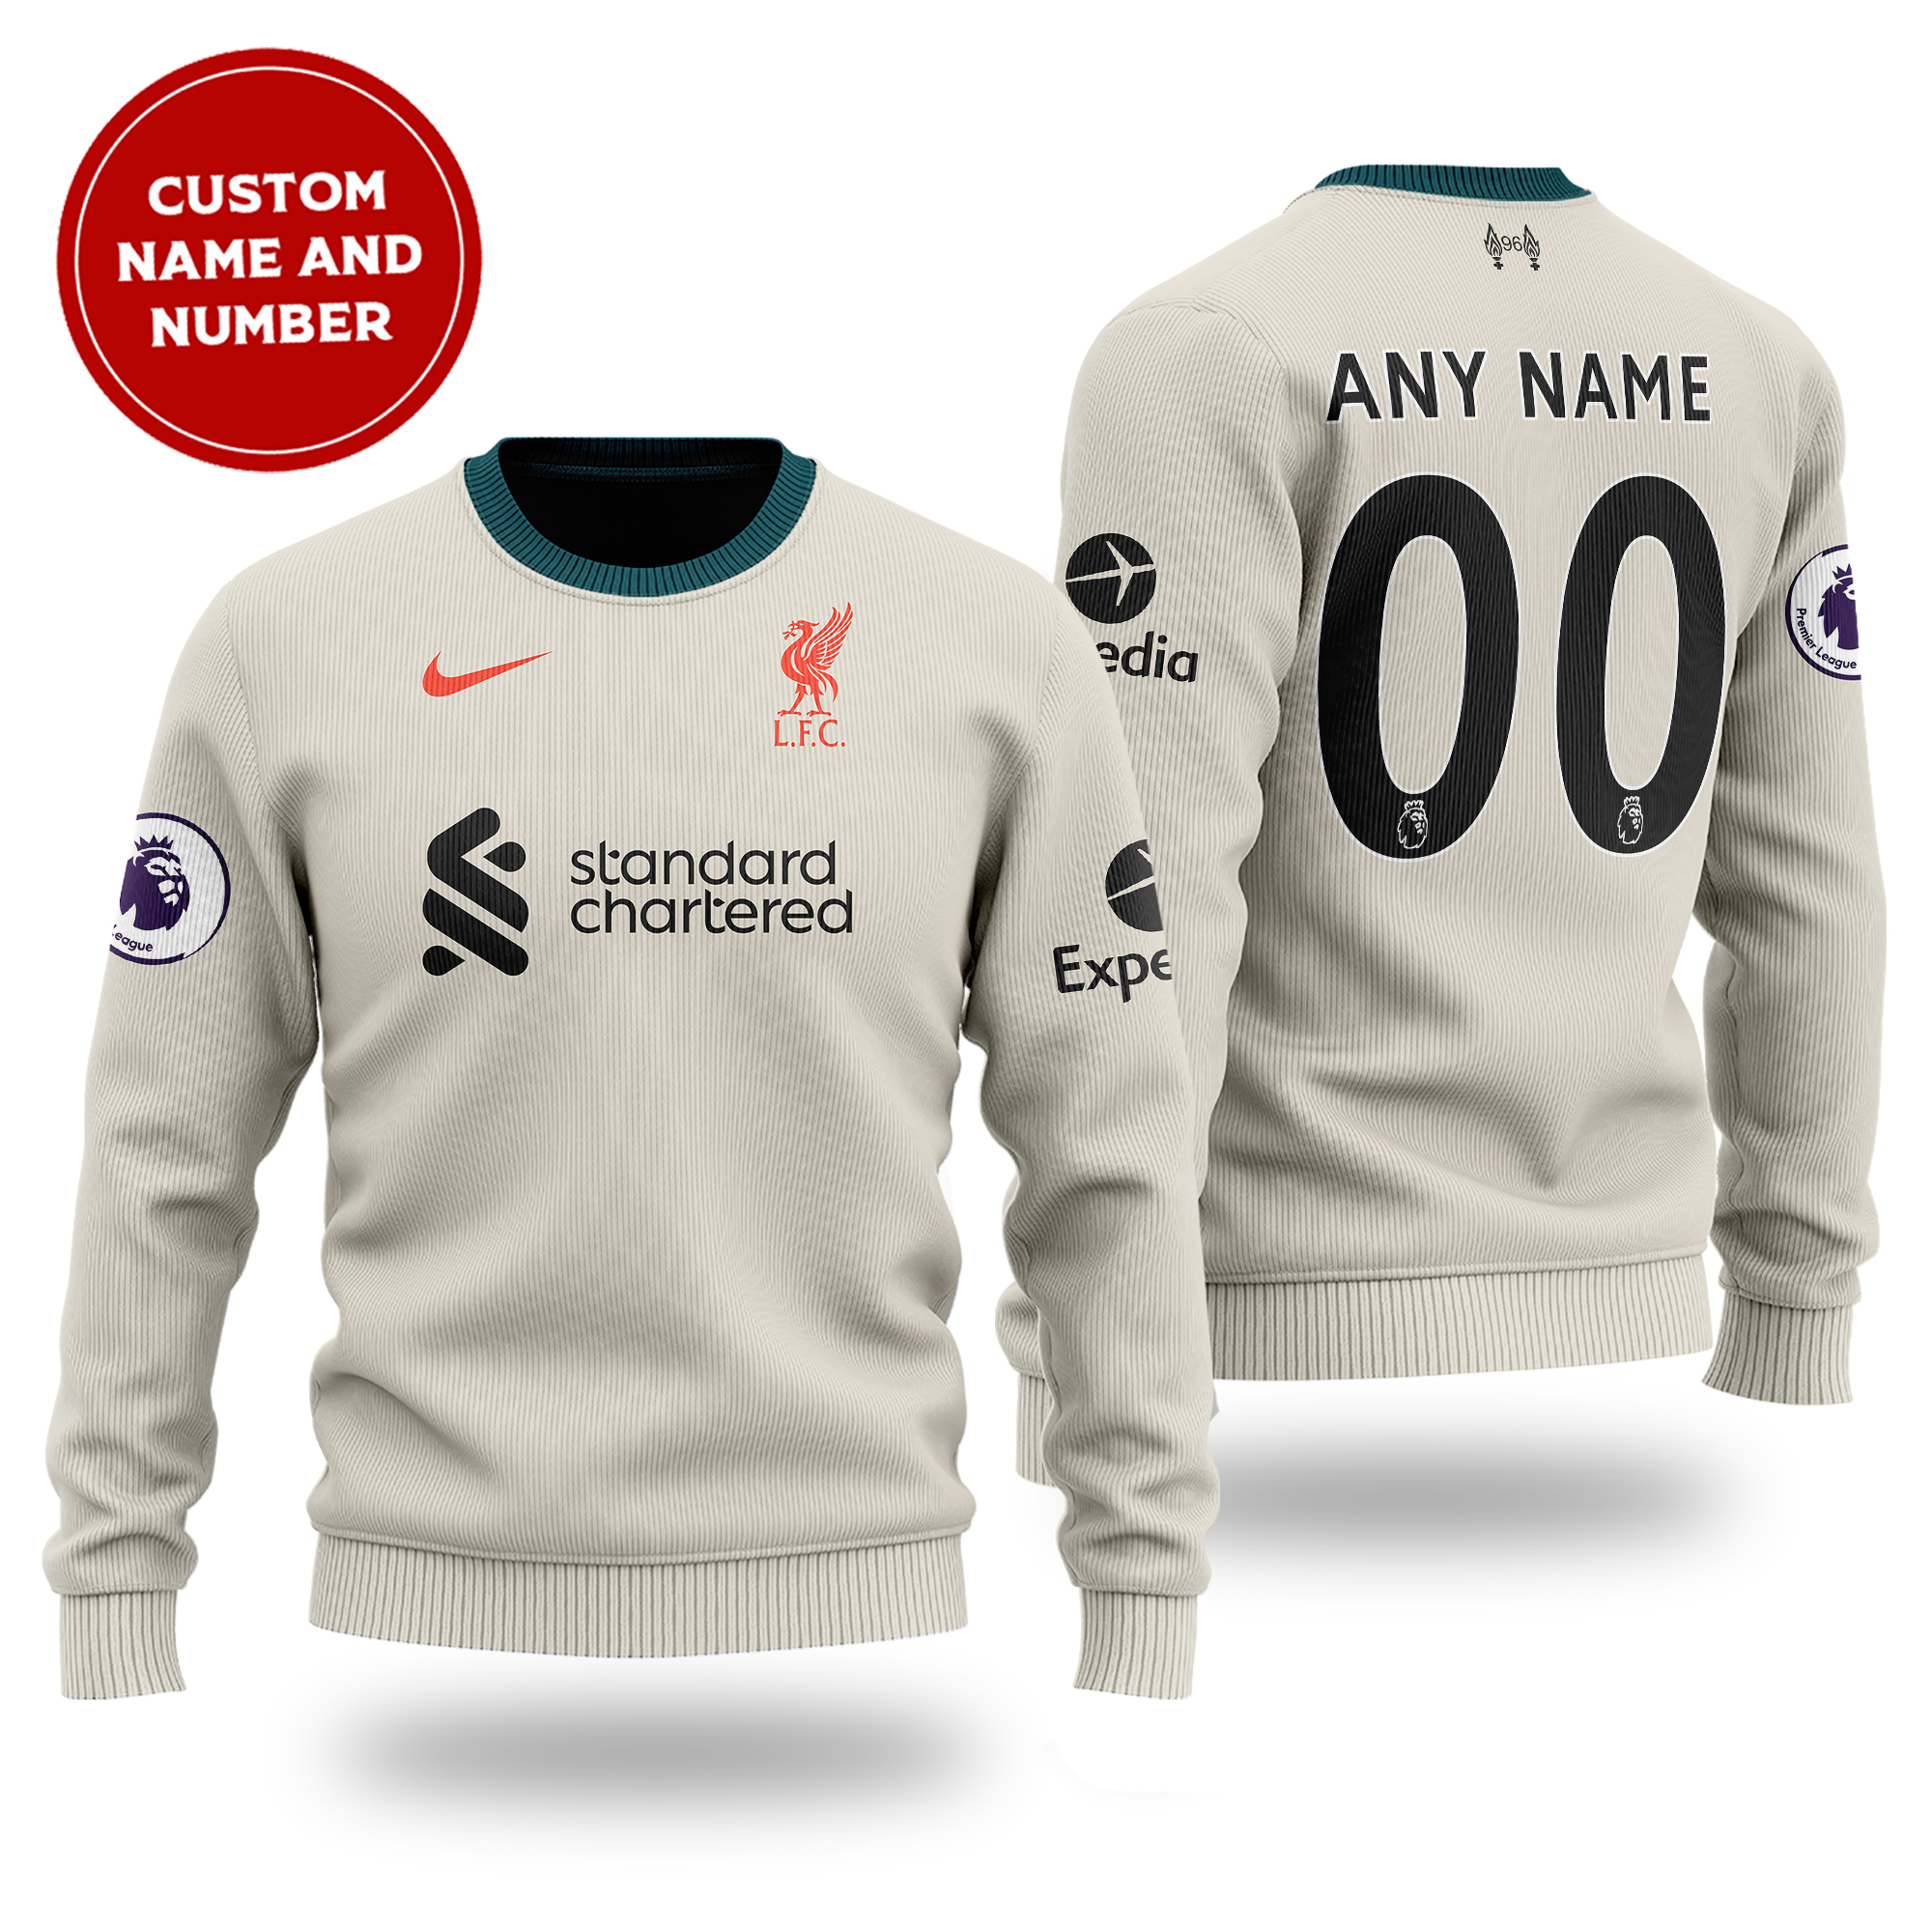 [ Amazing ] Primier League Liverpool FC away kit cutom name and number sweater – Saleoff 261121